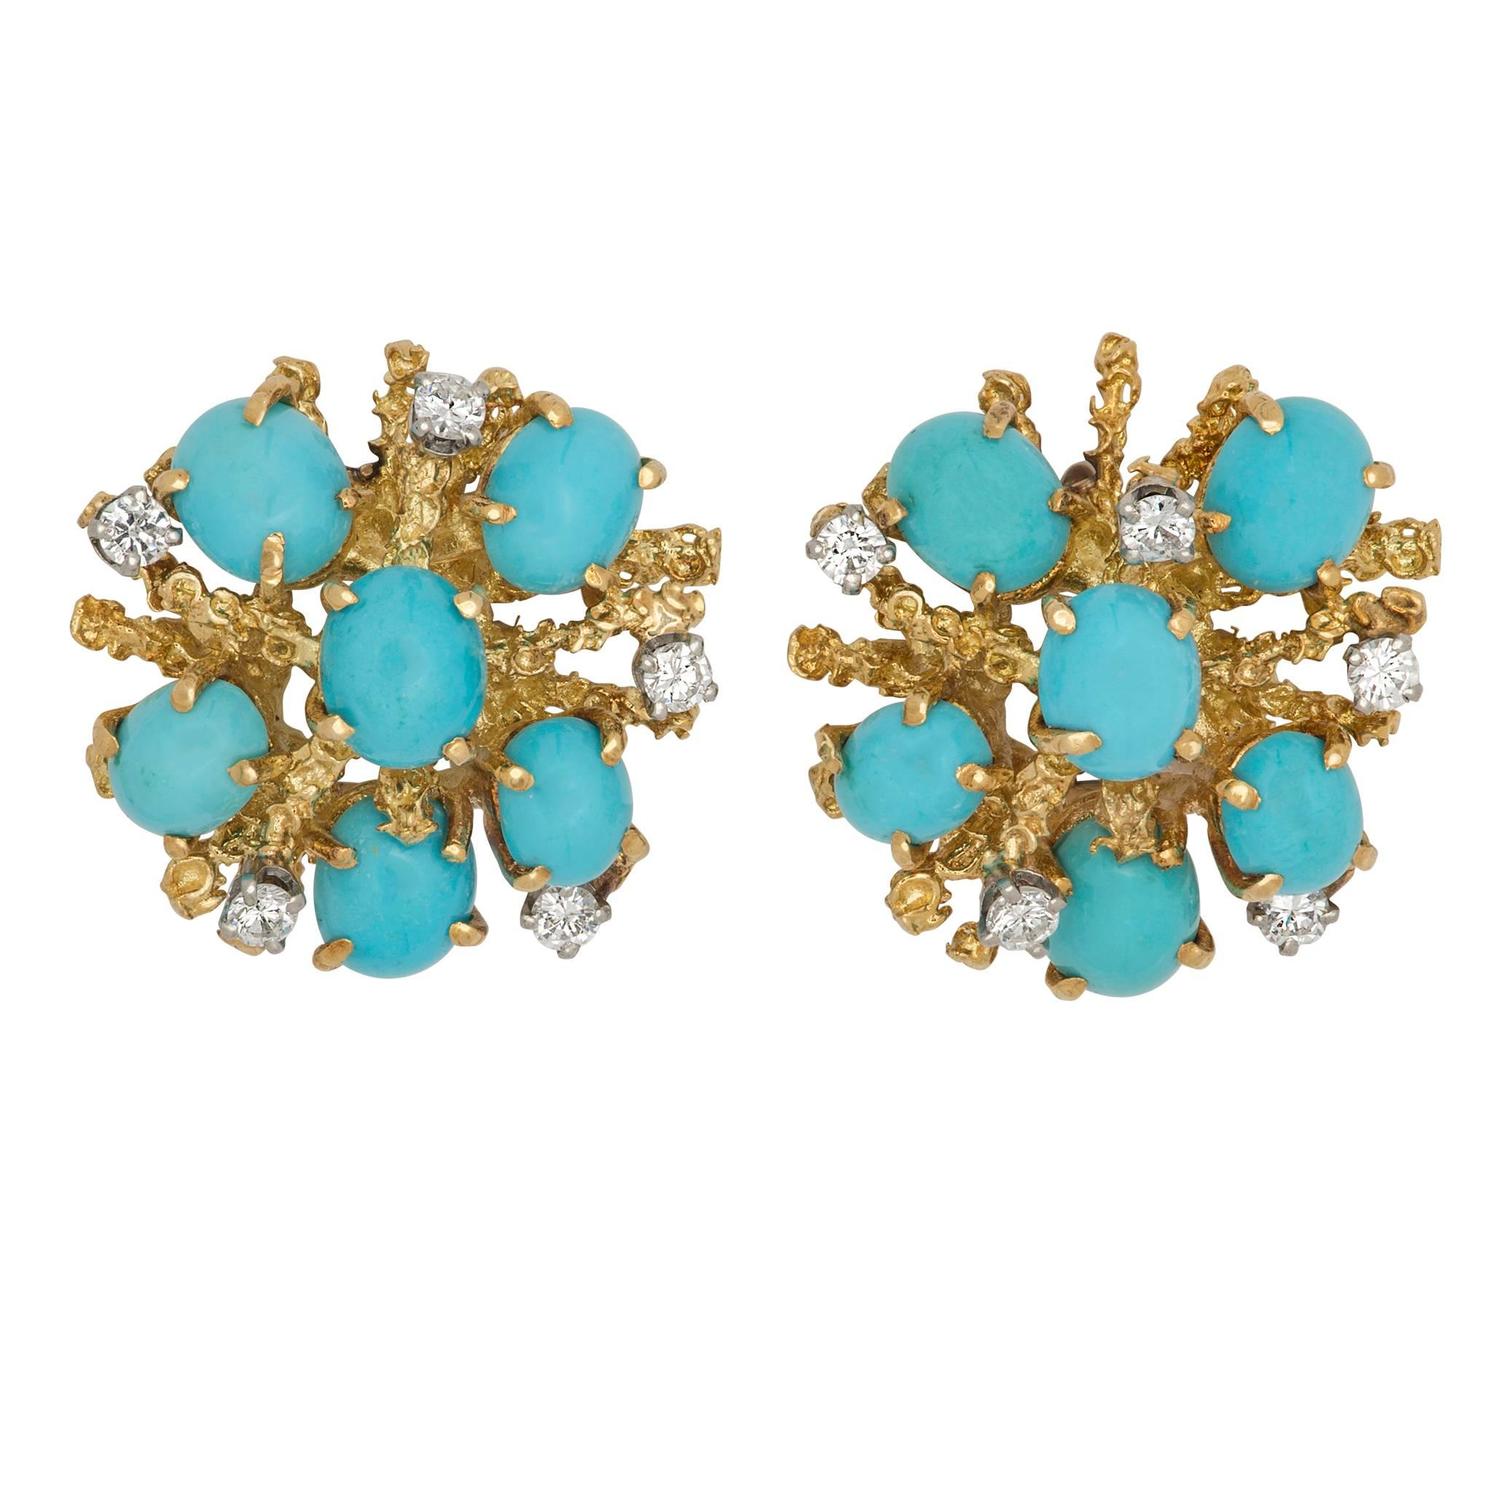 Persian Turquoise Diamond Gold Earrings For Sale at 1stdibs